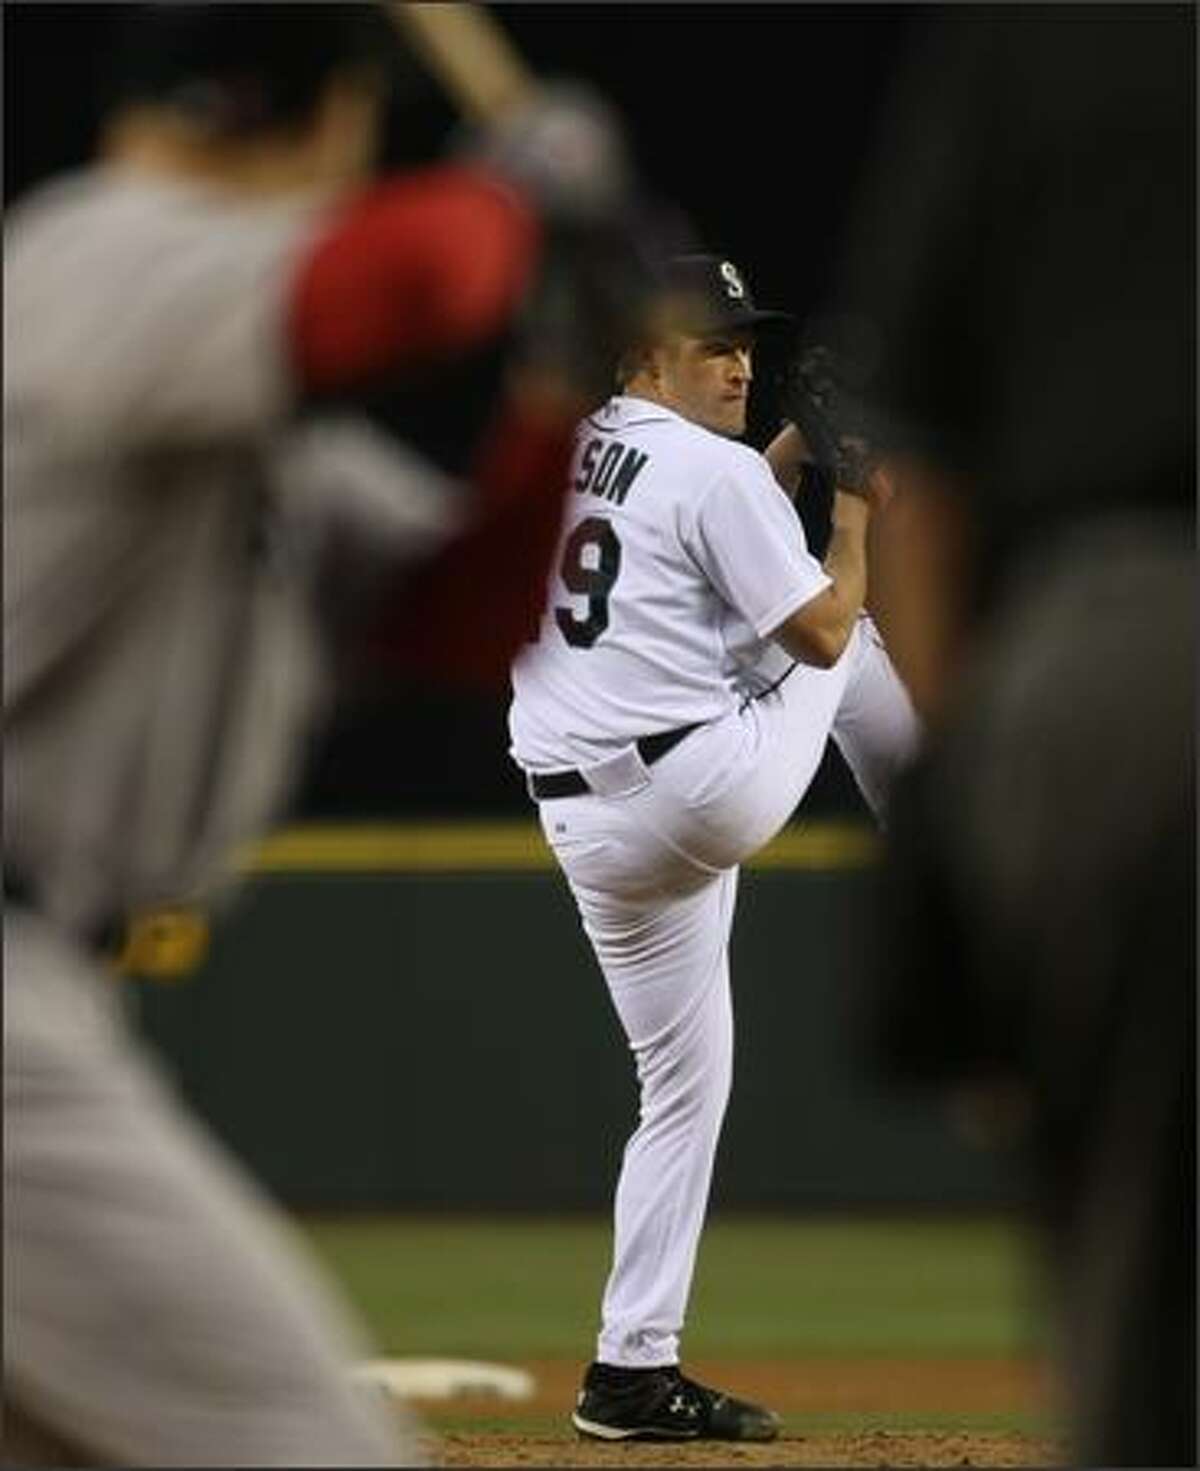 Garrett Olson pitches during the 5-3 loss to the Boston Red Sox at Safeco Field.